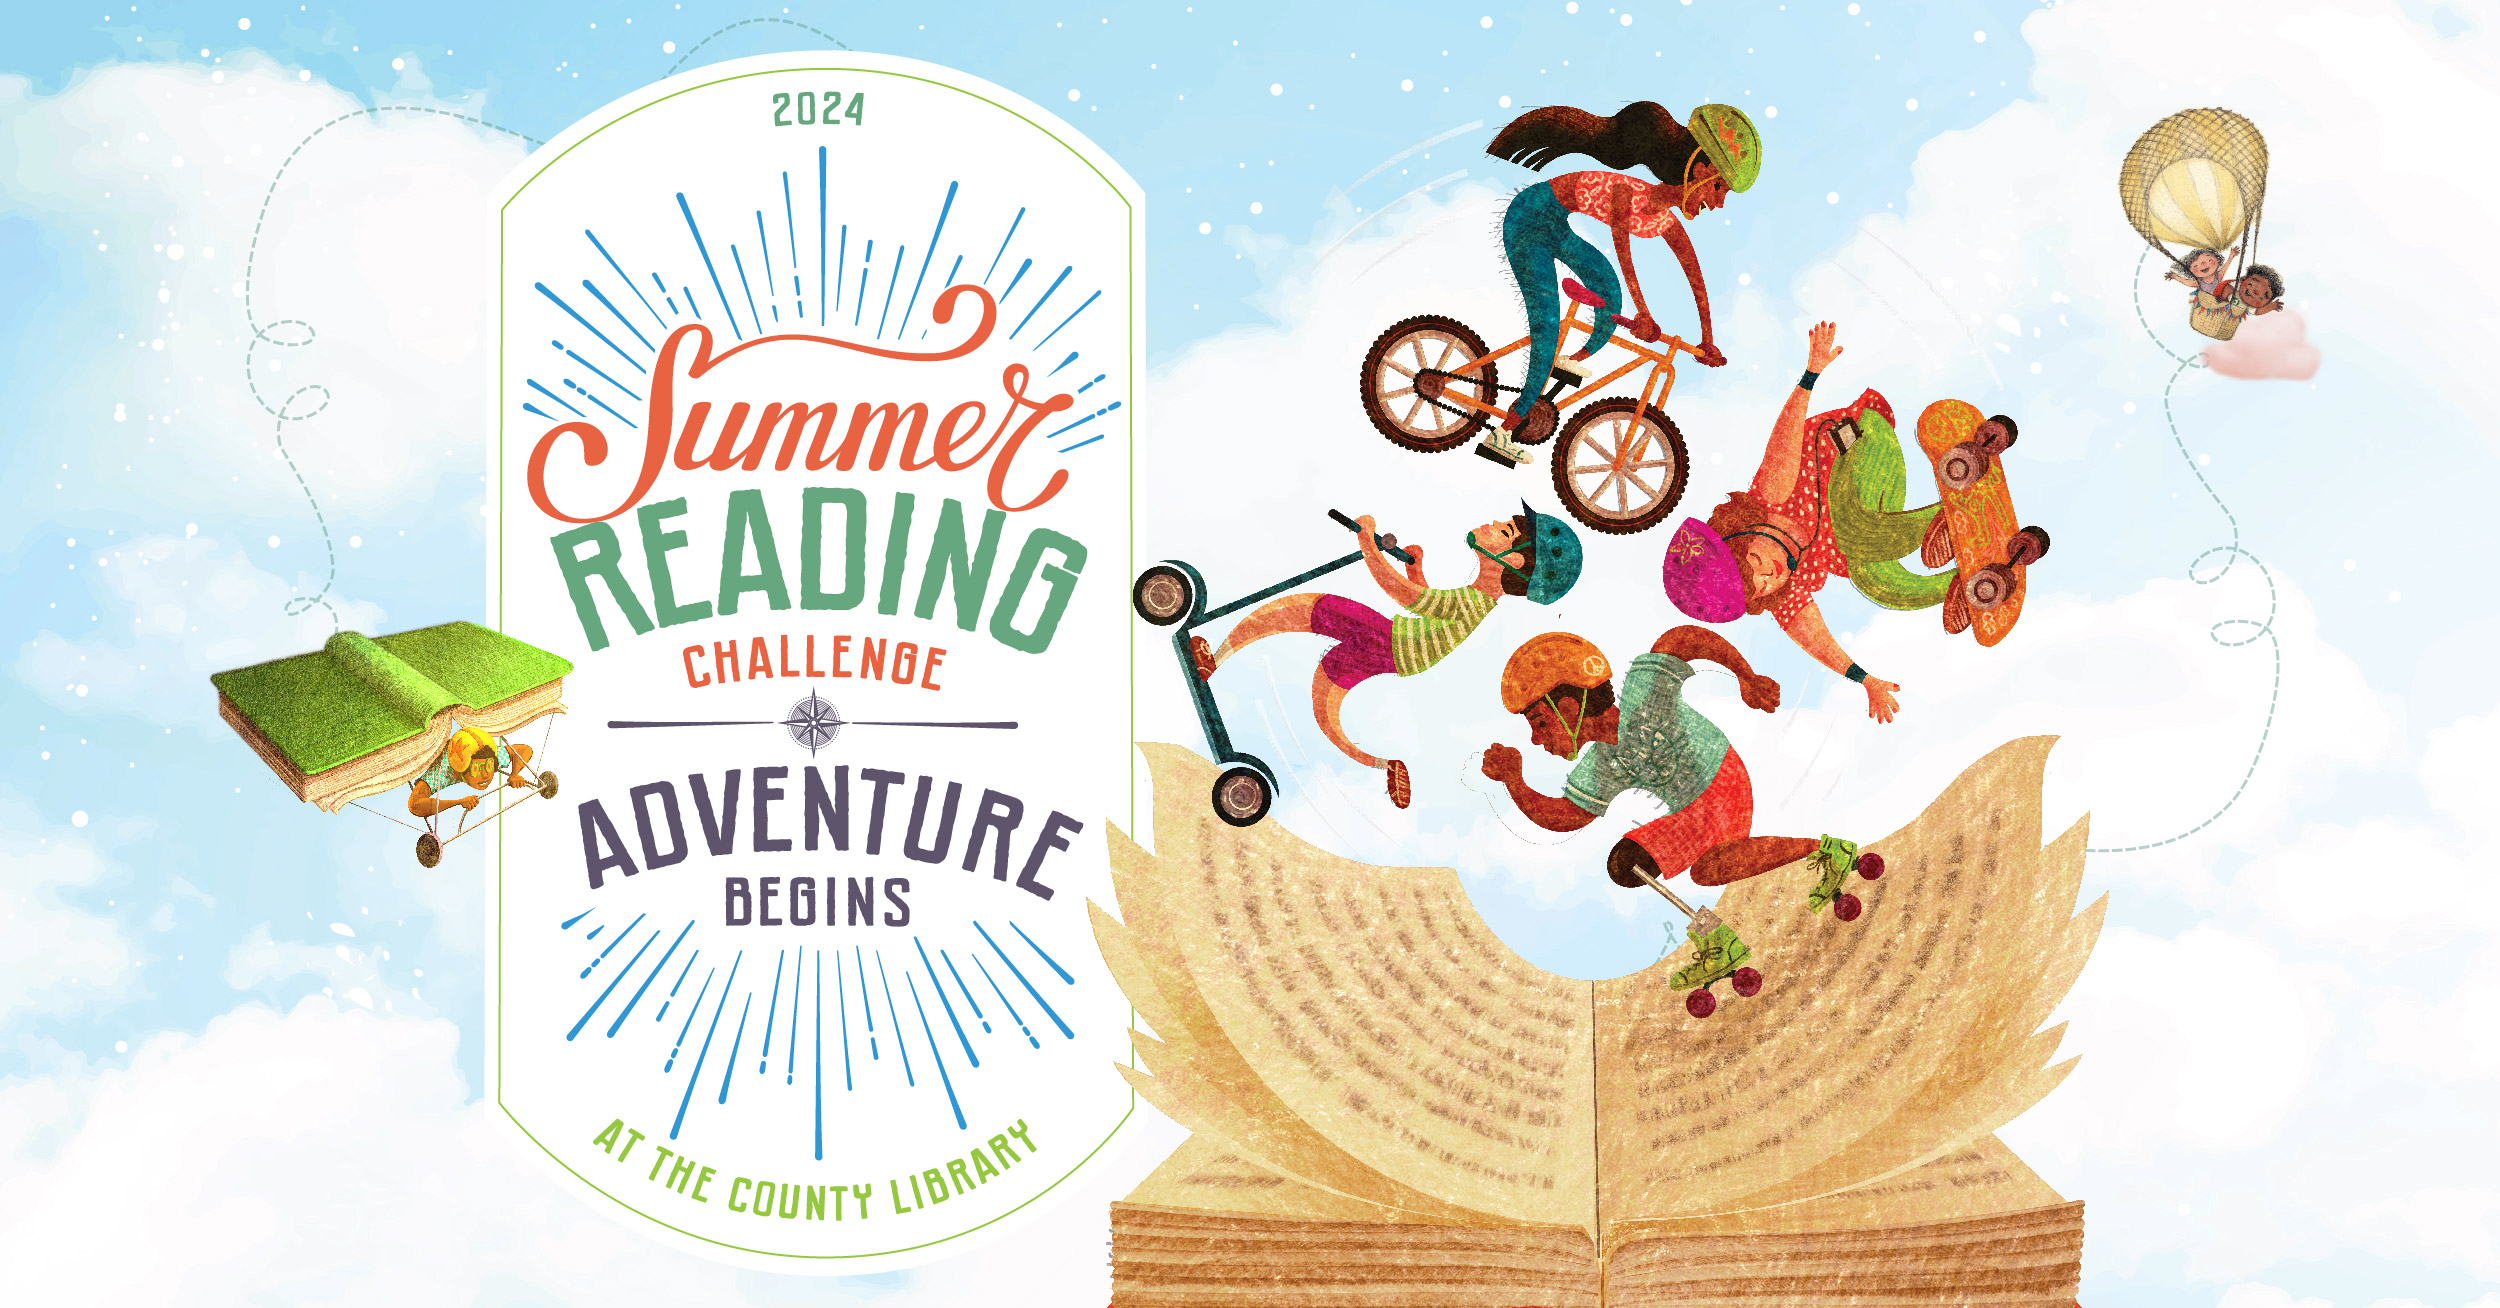 Embark on an epic quest and unlock the thrill of adventure as you read, create, learn, play, and connect your way to prizes and discounted activities all summer long!